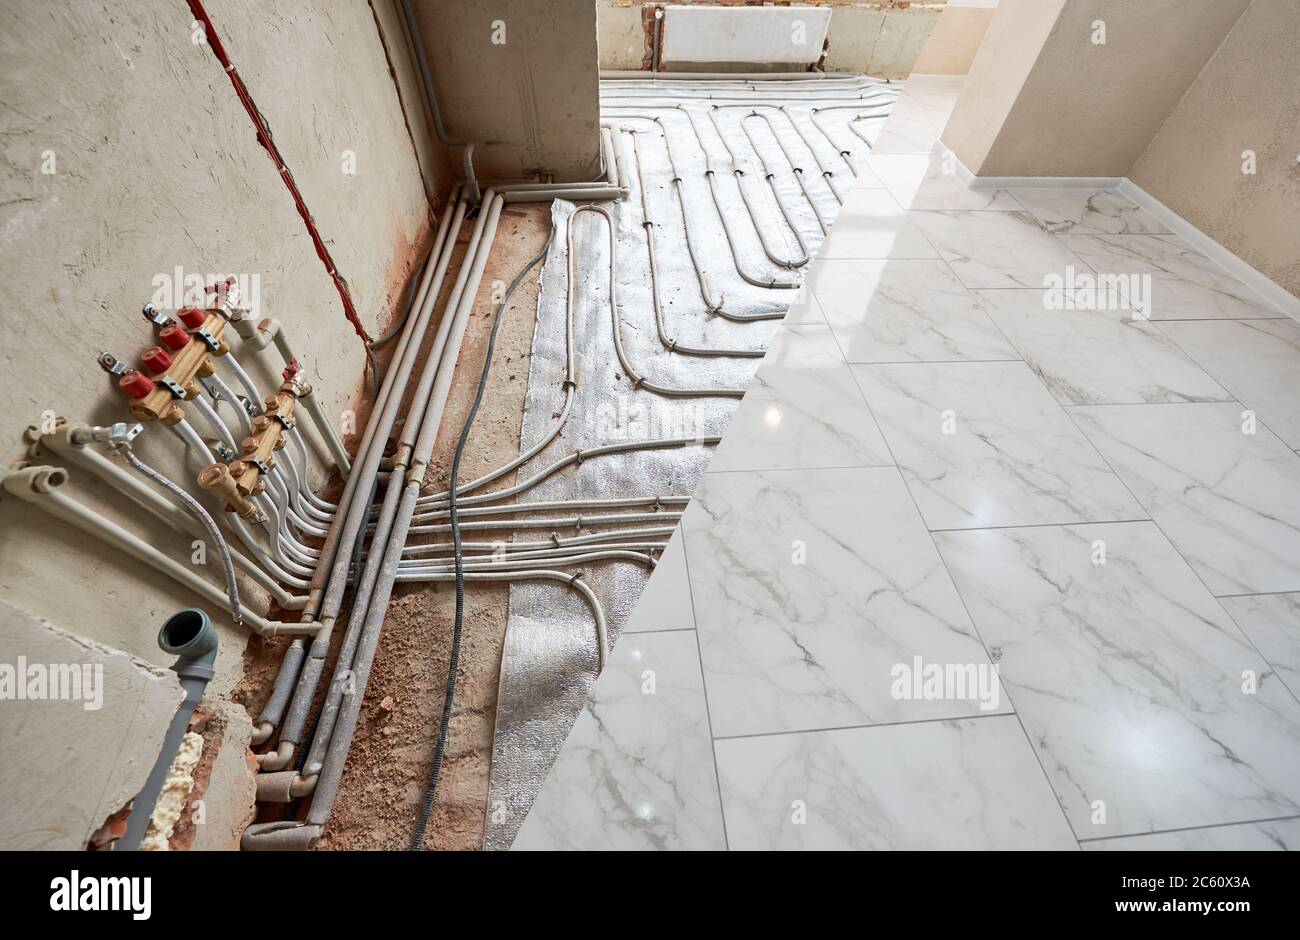 Snapshot of a floor before and after renovation. Conduction of pipes for floor heating system vs new white shiny tiles on the floor in spacious room. Concept of home renovation and restoration. Stock Photo